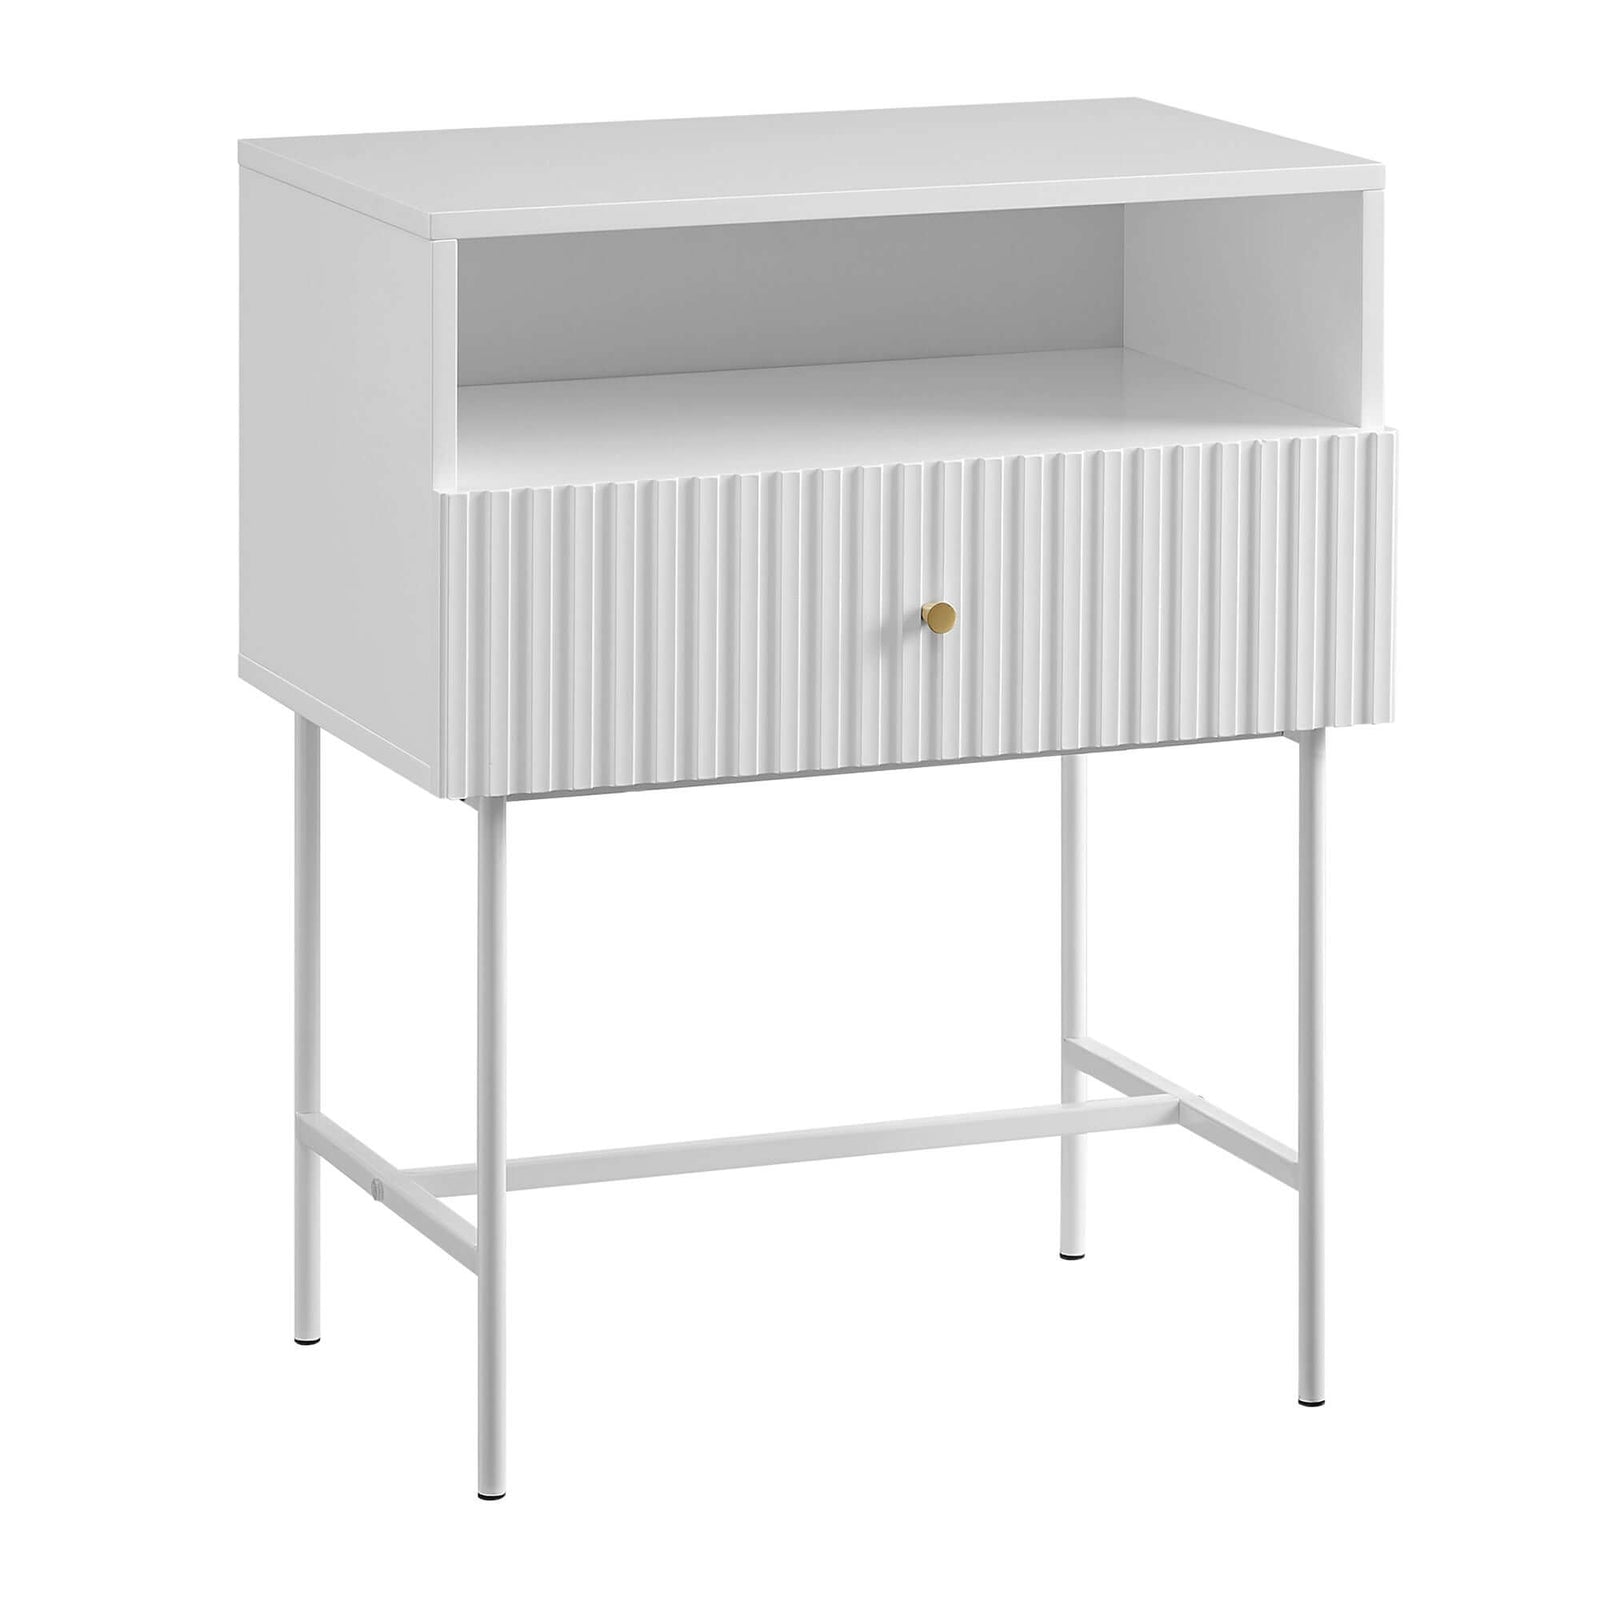 Lucia Slender Fluted Bedside Table in White-Upinteriors